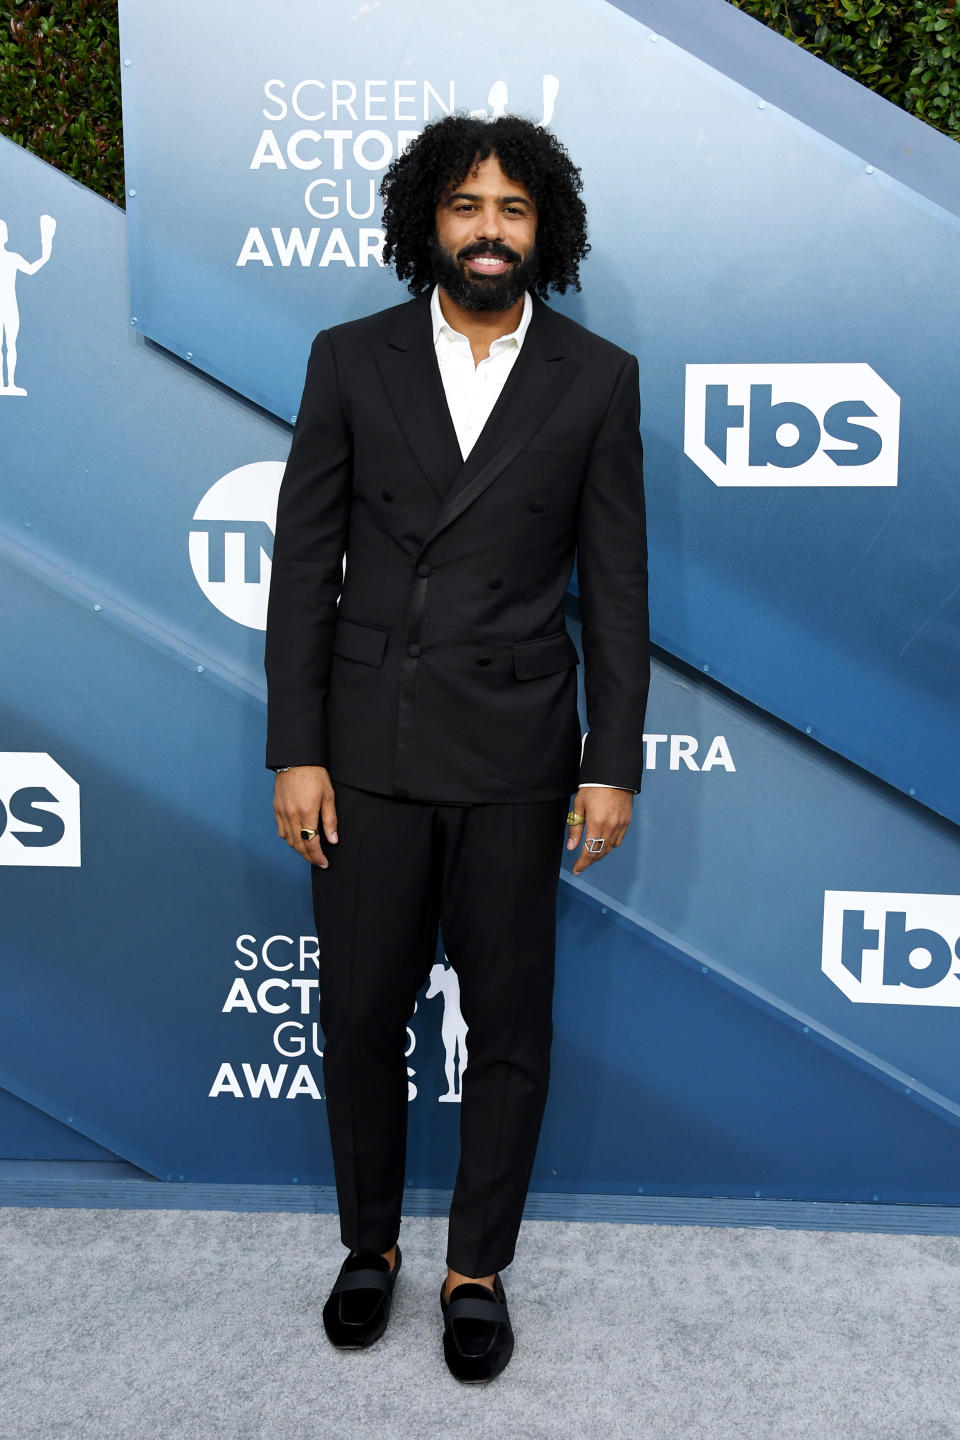 LOS ANGELES, CALIFORNIA - JANUARY 19: Daveed Diggs attends the 26th Annual Screen Actors Guild Awards at The Shrine Auditorium on January 19, 2020 in Los Angeles, California. (Photo by Jon Kopaloff/Getty Images)